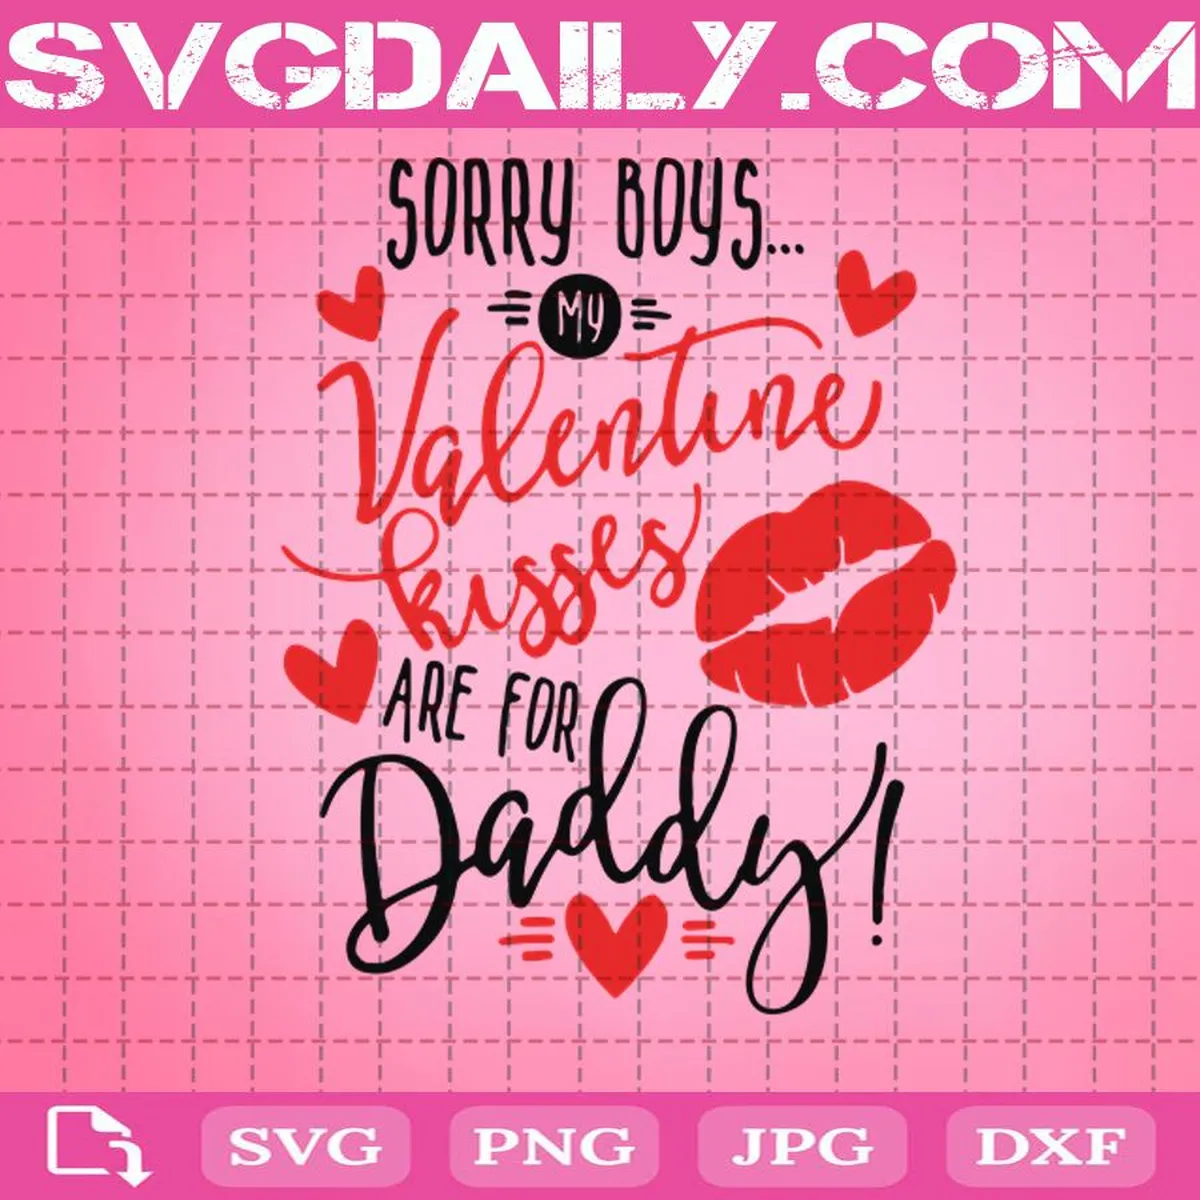 Sorry Boys Valentine My Kisses Are For Daddy Svg, Valentine’s Day Svg, Daddy Svg, Kisses Svg, Svg Png Dxf Eps AI Instant Download